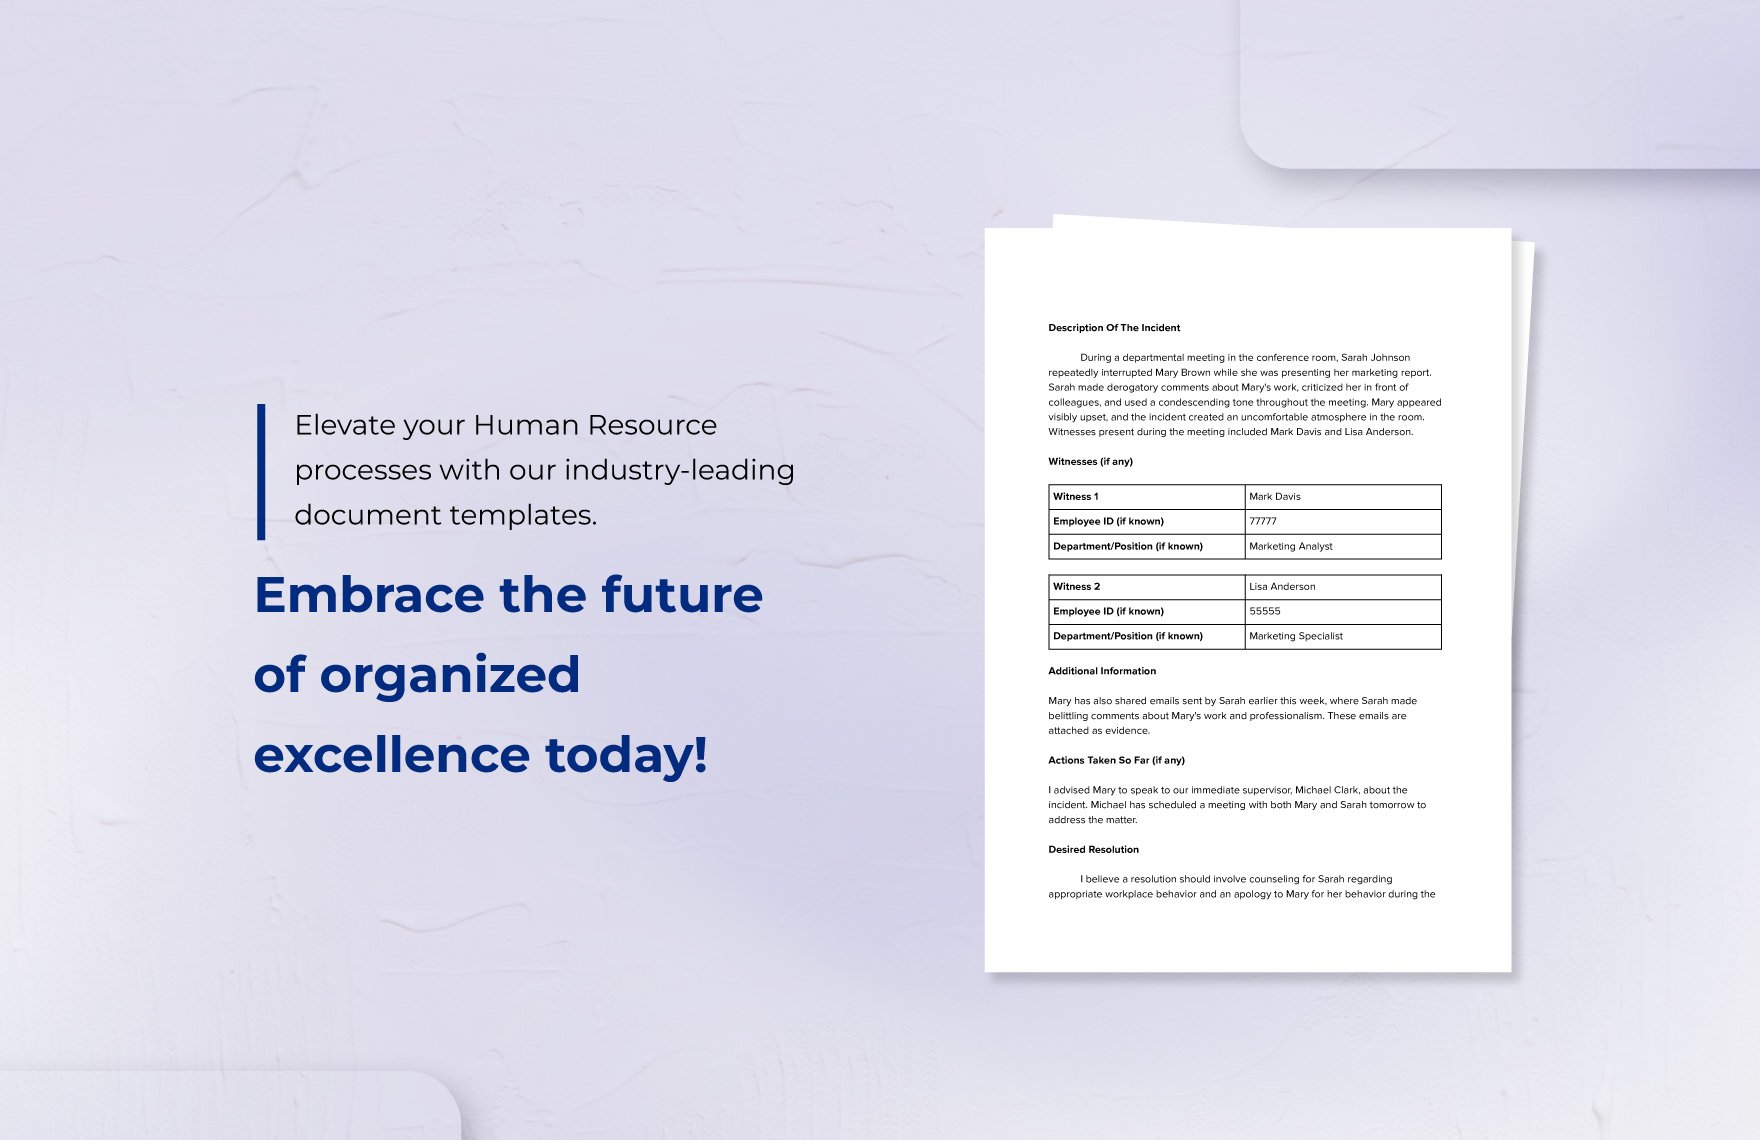 Workplace Bullying Report HR Template